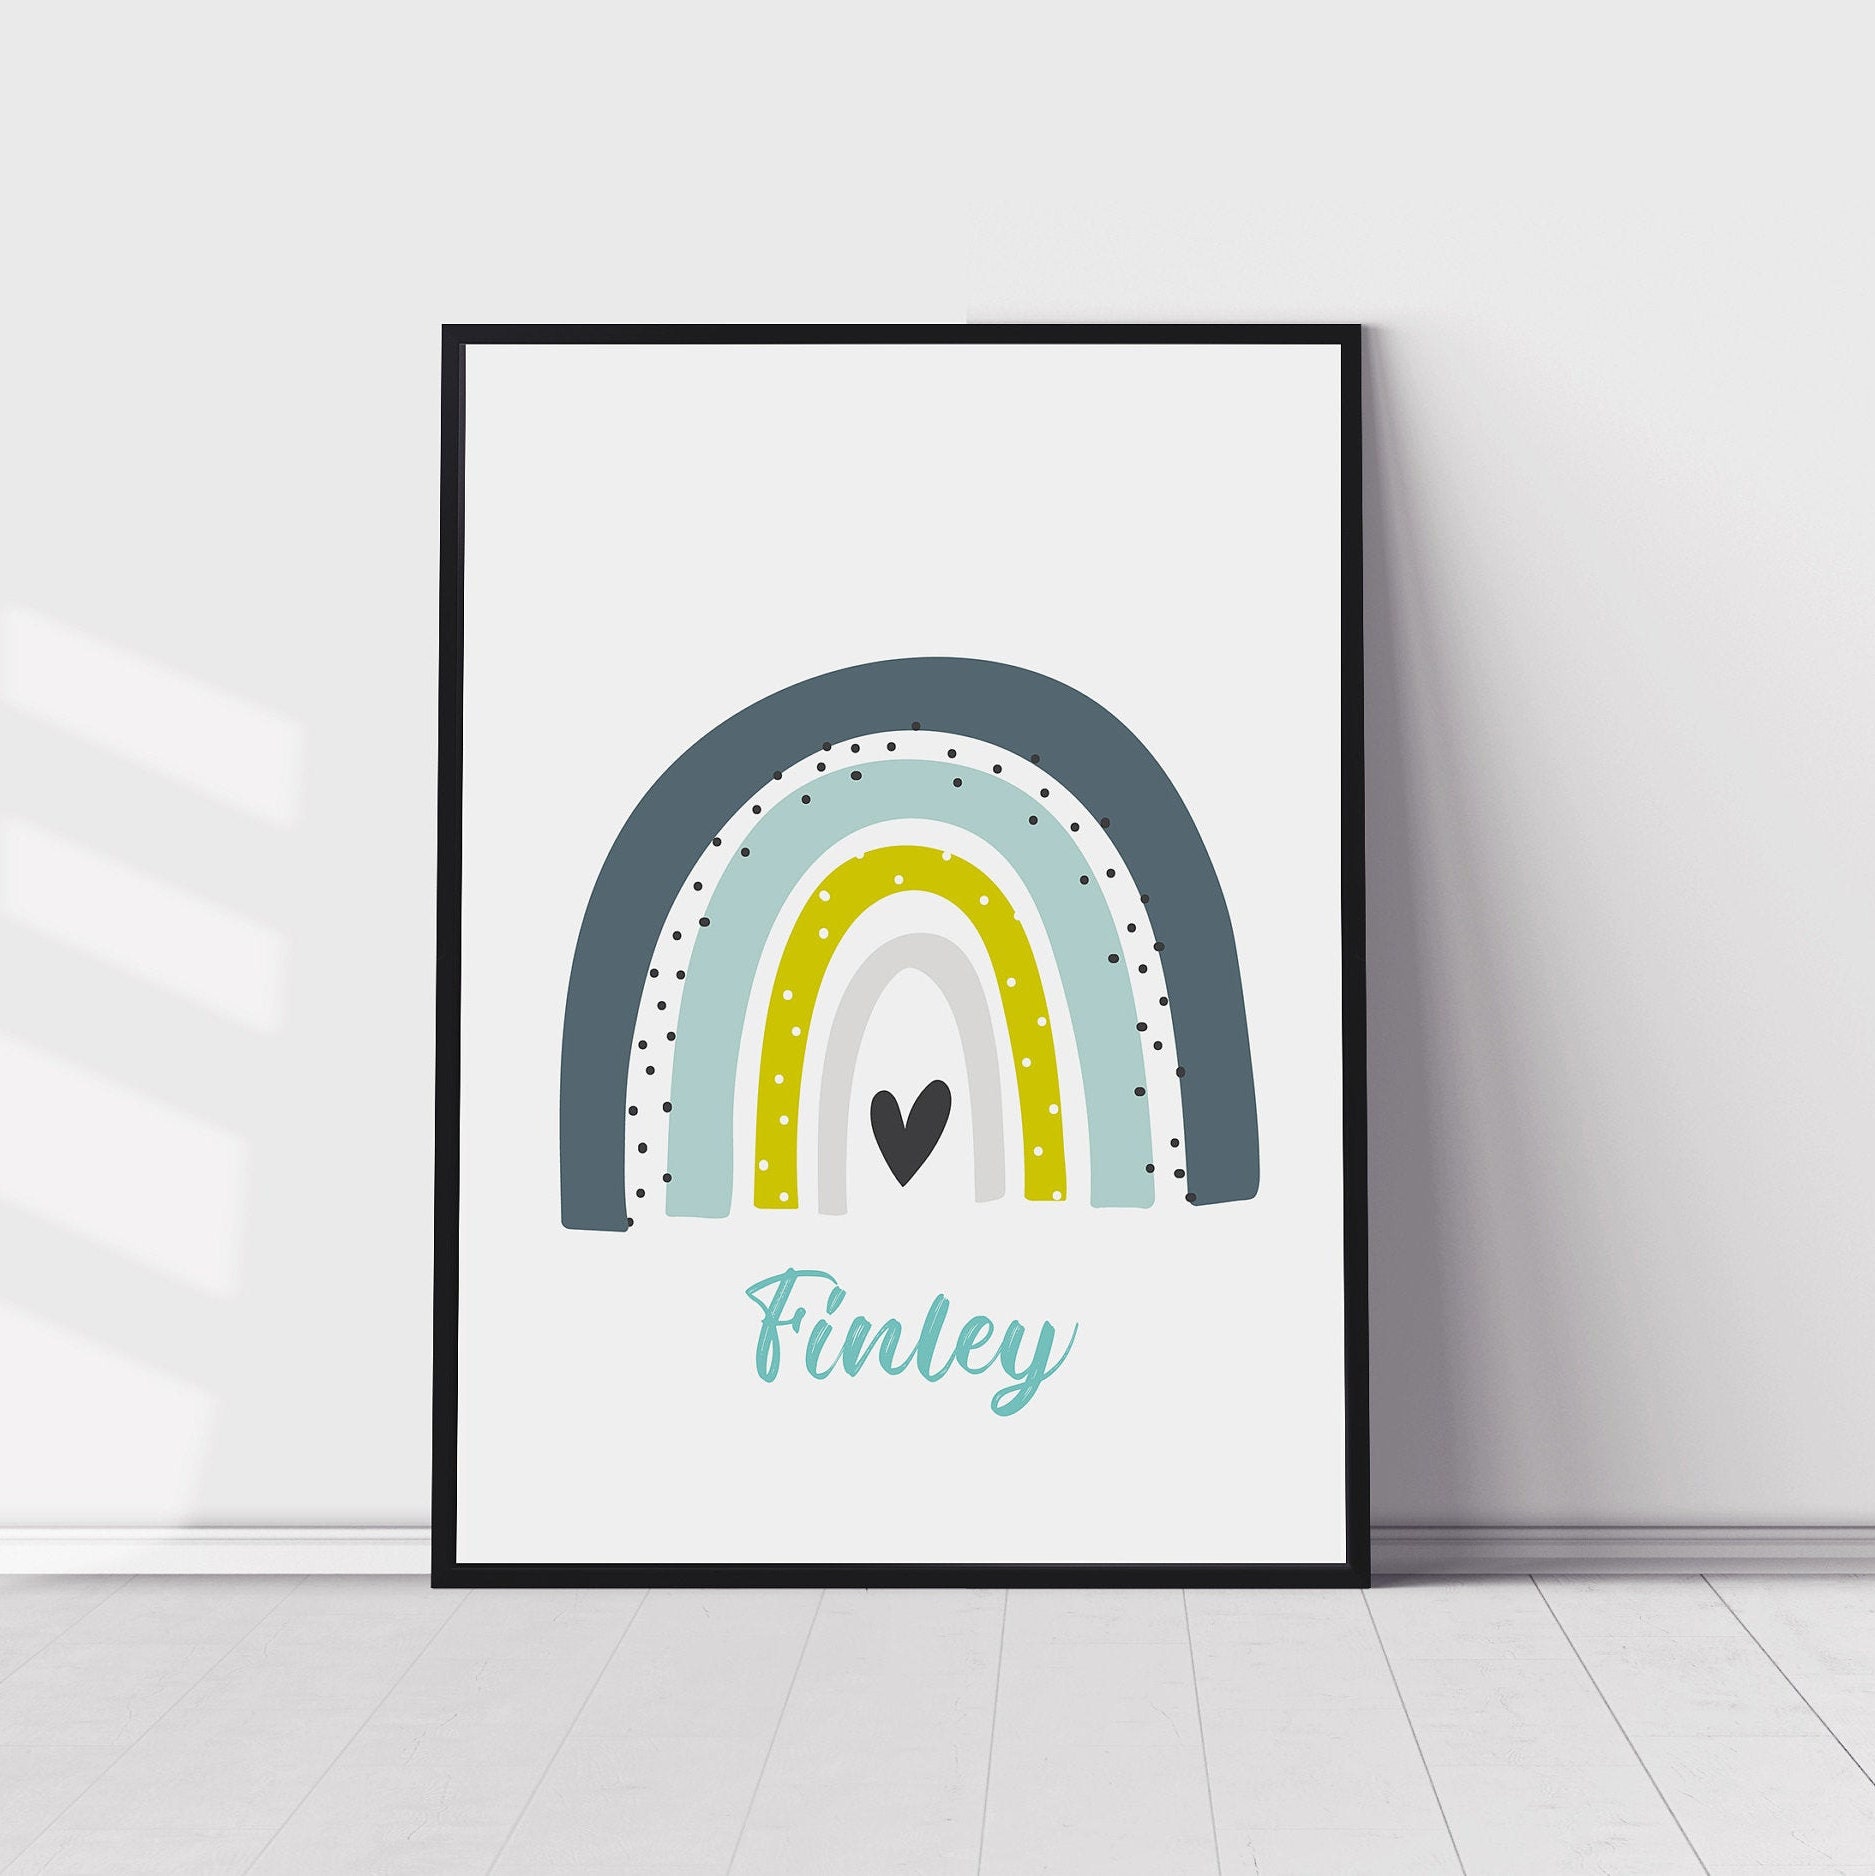 Baby Gifts Baby Print Bedroom Prints Boys /& Girls Name Children/'s Nursery Decor Personalised Navy and Grey Rainbow Print with Name